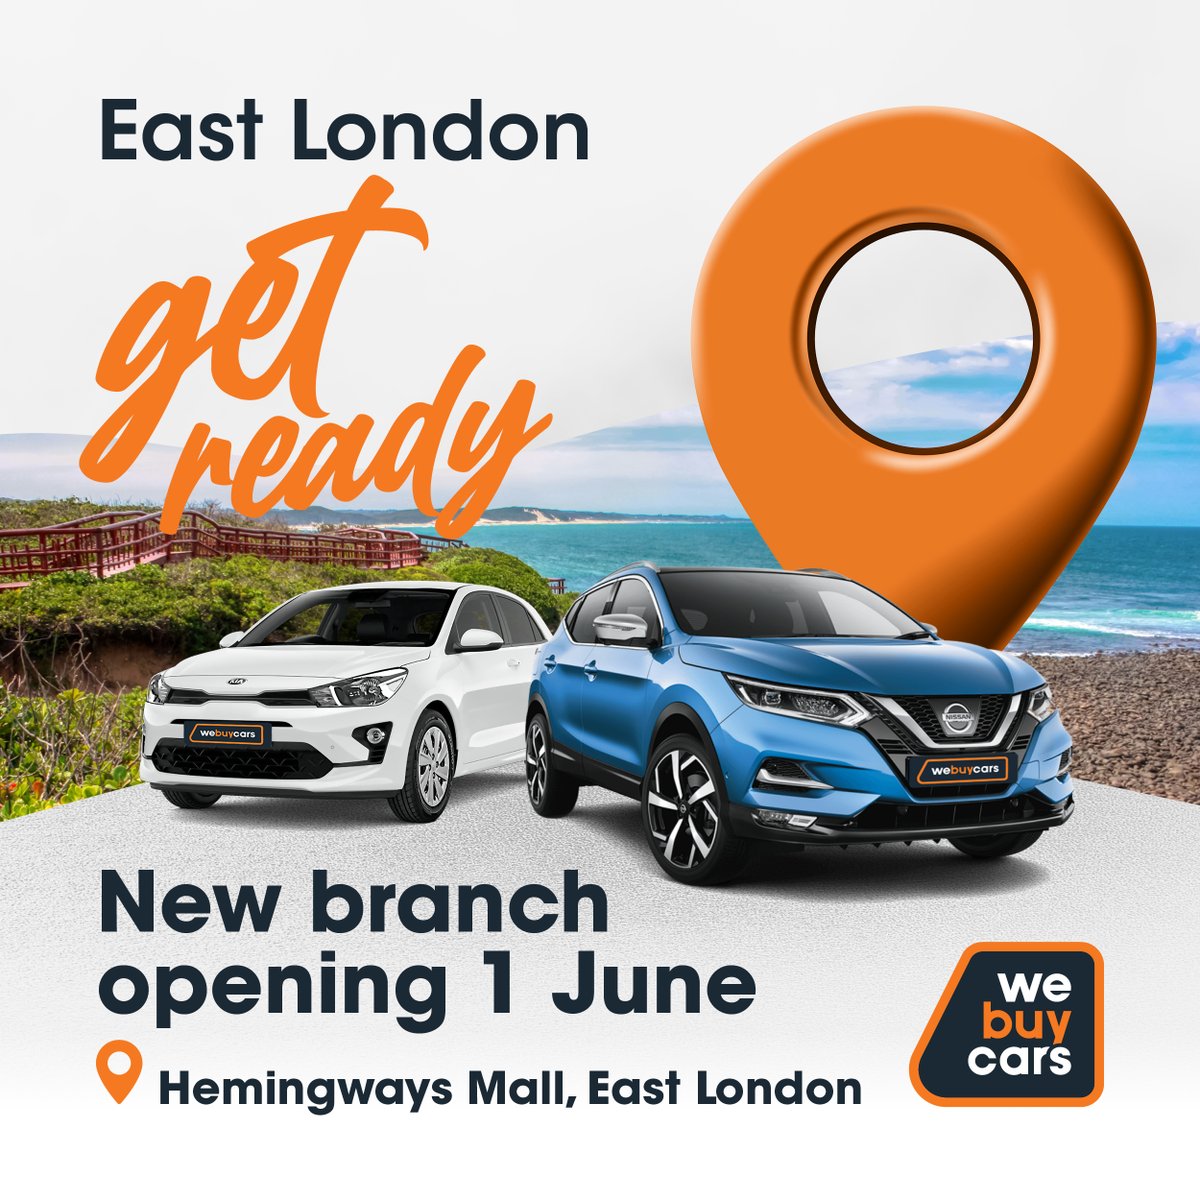 East London, it's time to get ready... A brand new #WeBuyCars branch is opening up near YOU 🙌🚗 #carsforsale #preownedcars #usedcars #usedcarsforsale #carshopping #carfinance #autosales #carsales #carlifestyle #kiarioclub